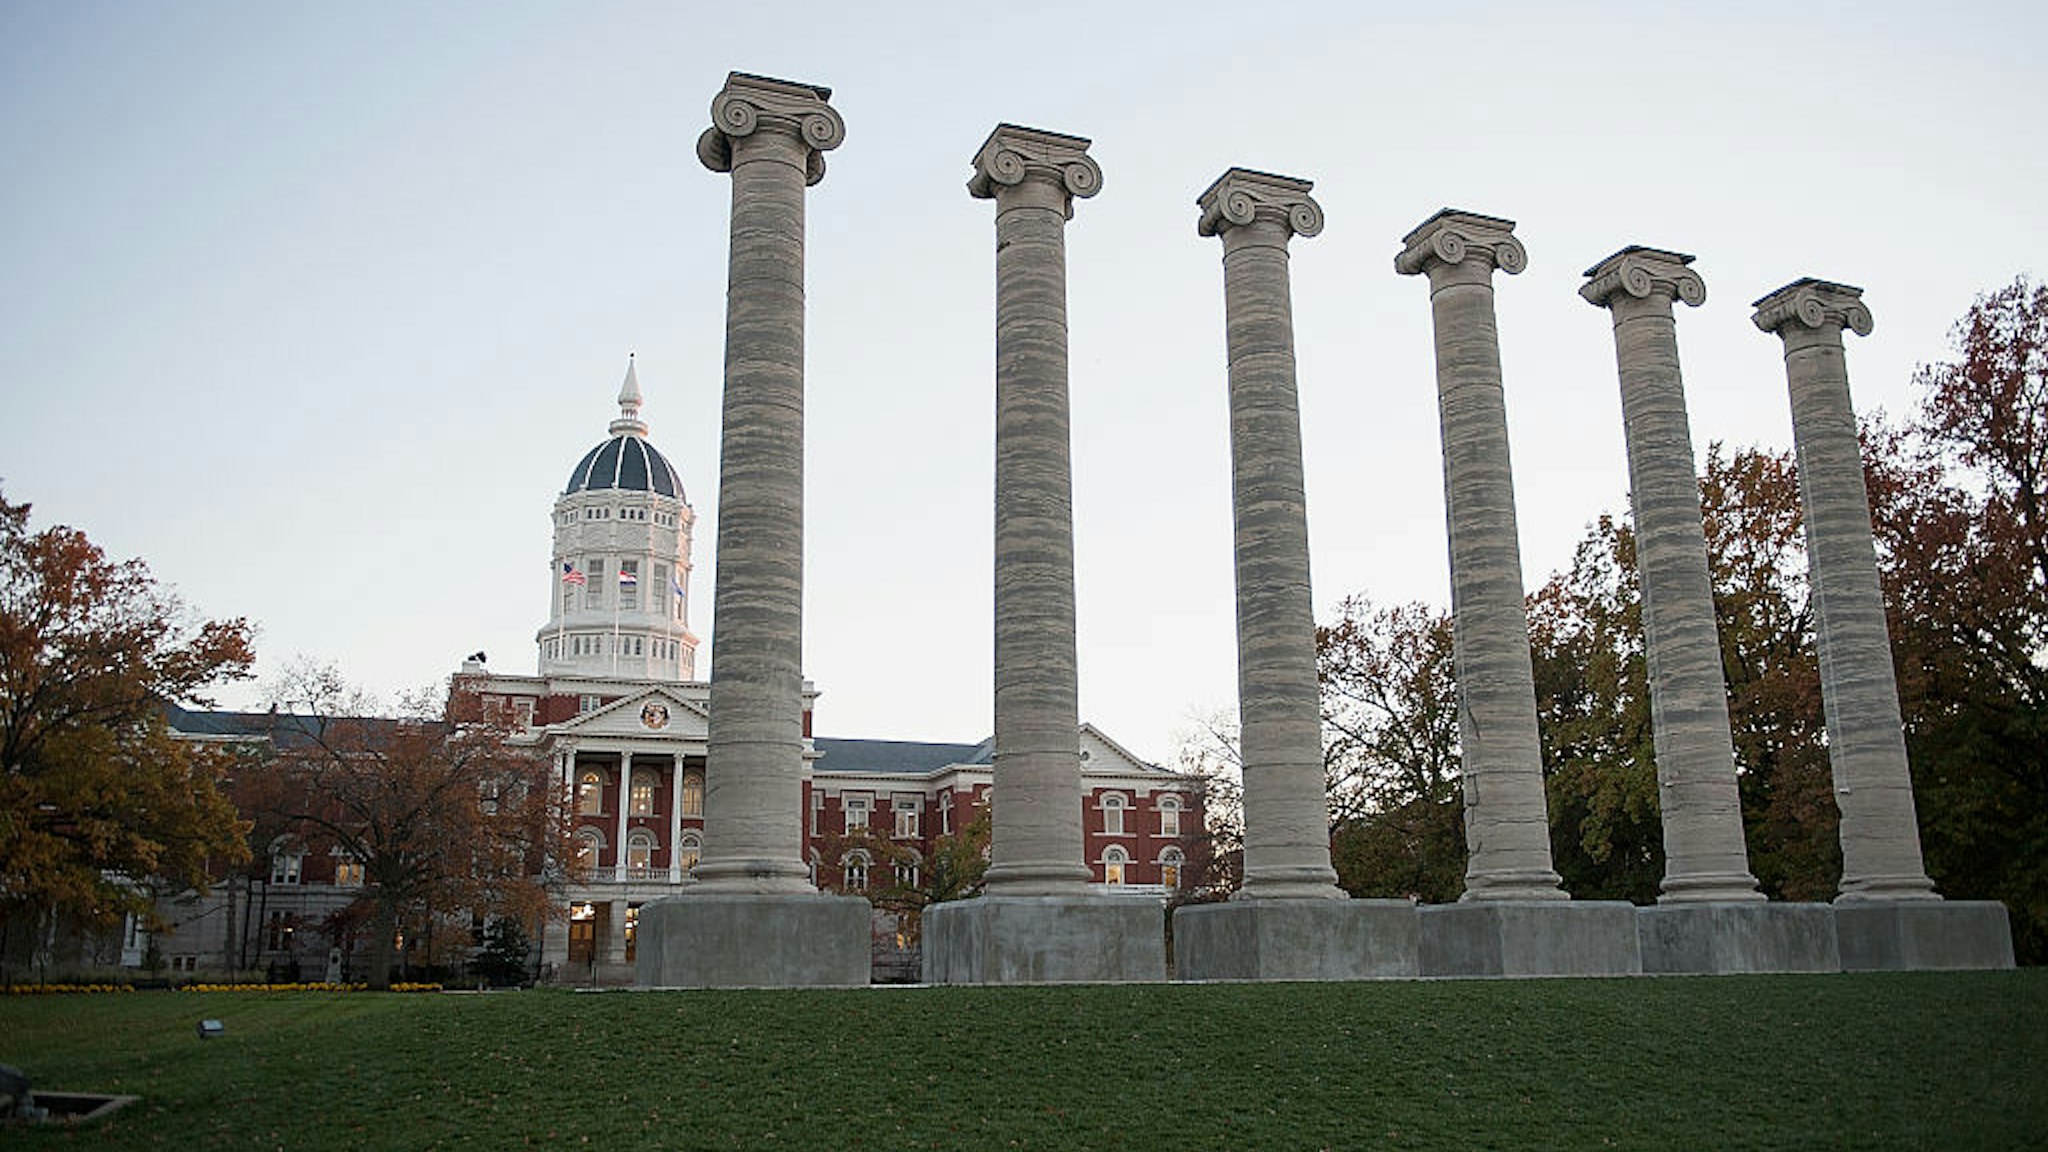 COLUMBIA, MO - NOVEMBER 10: Academic Hall on the campus of University of Missouri - Columbia is seen on November 10, 2015 in Columbia, Missouri. The university looks to get things back to normal after the recent protests on campus that lead to the resignation of the school's President and Chancellor on November 9.